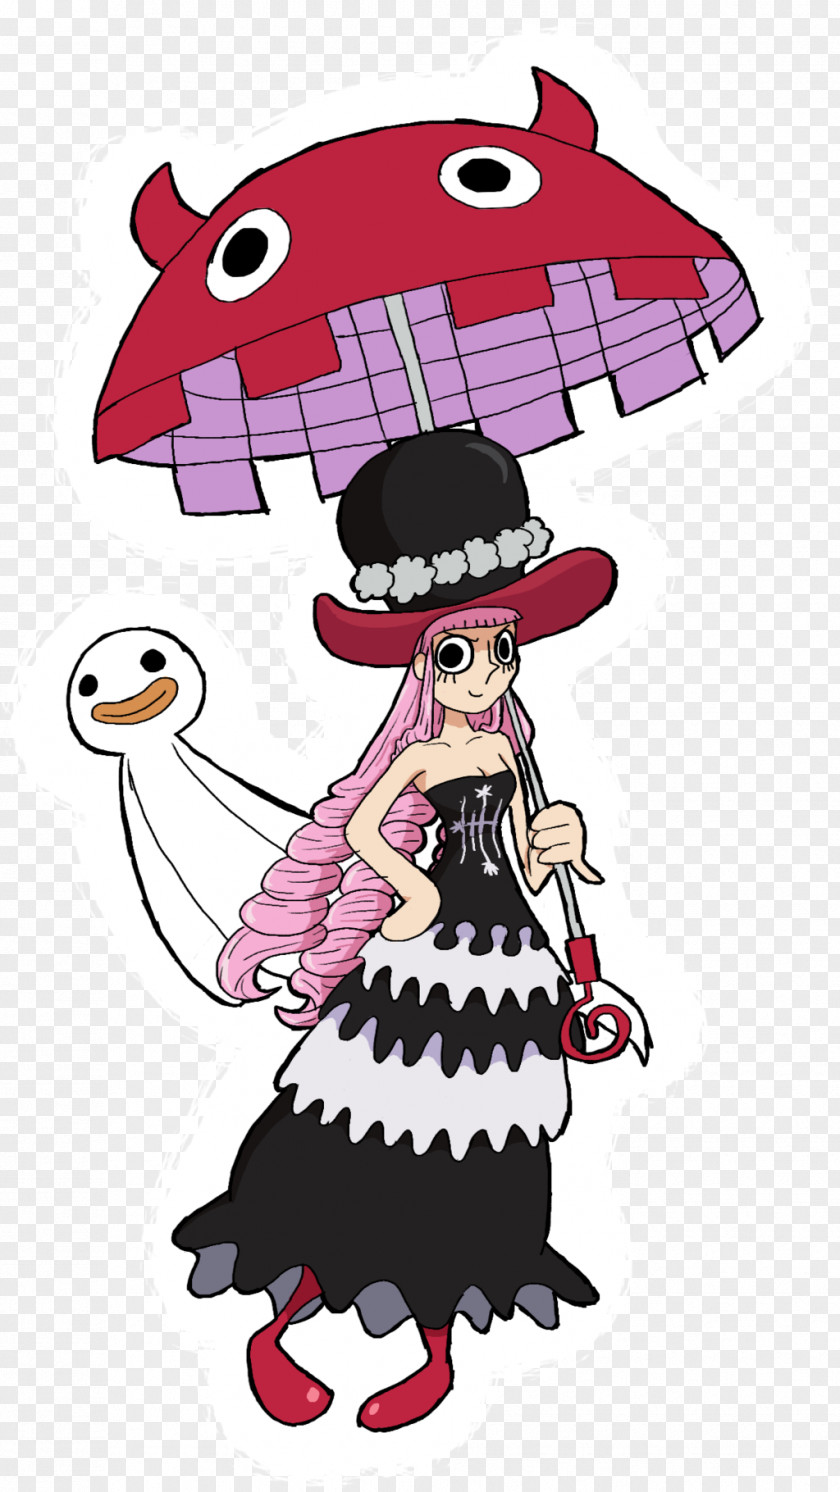 Perona Pink M Clothing Accessories Character Clip Art PNG